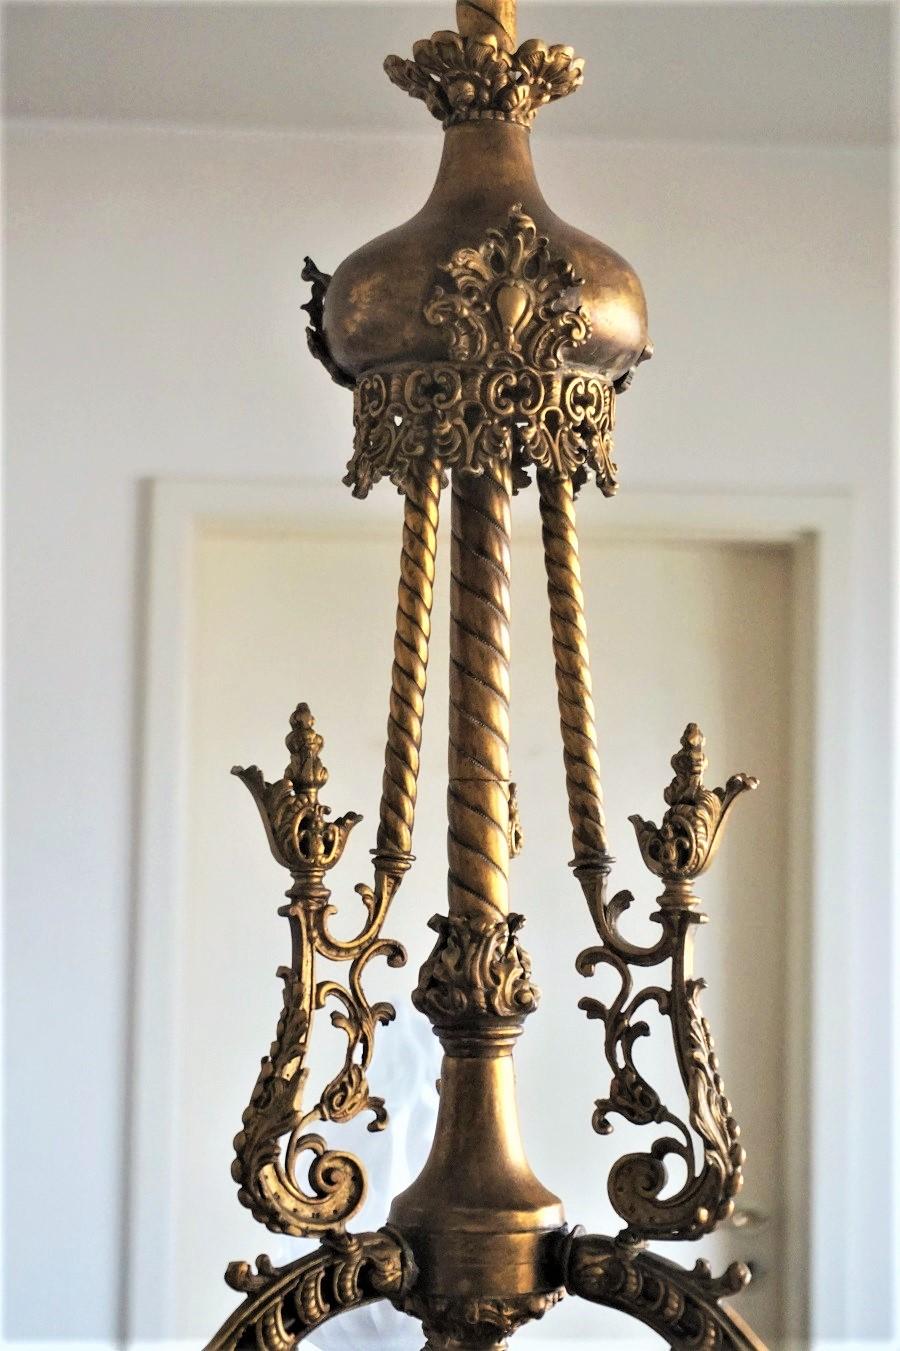 18th Century French Fire-Gilded Bronze Electried Church Chandelier For Sale 4